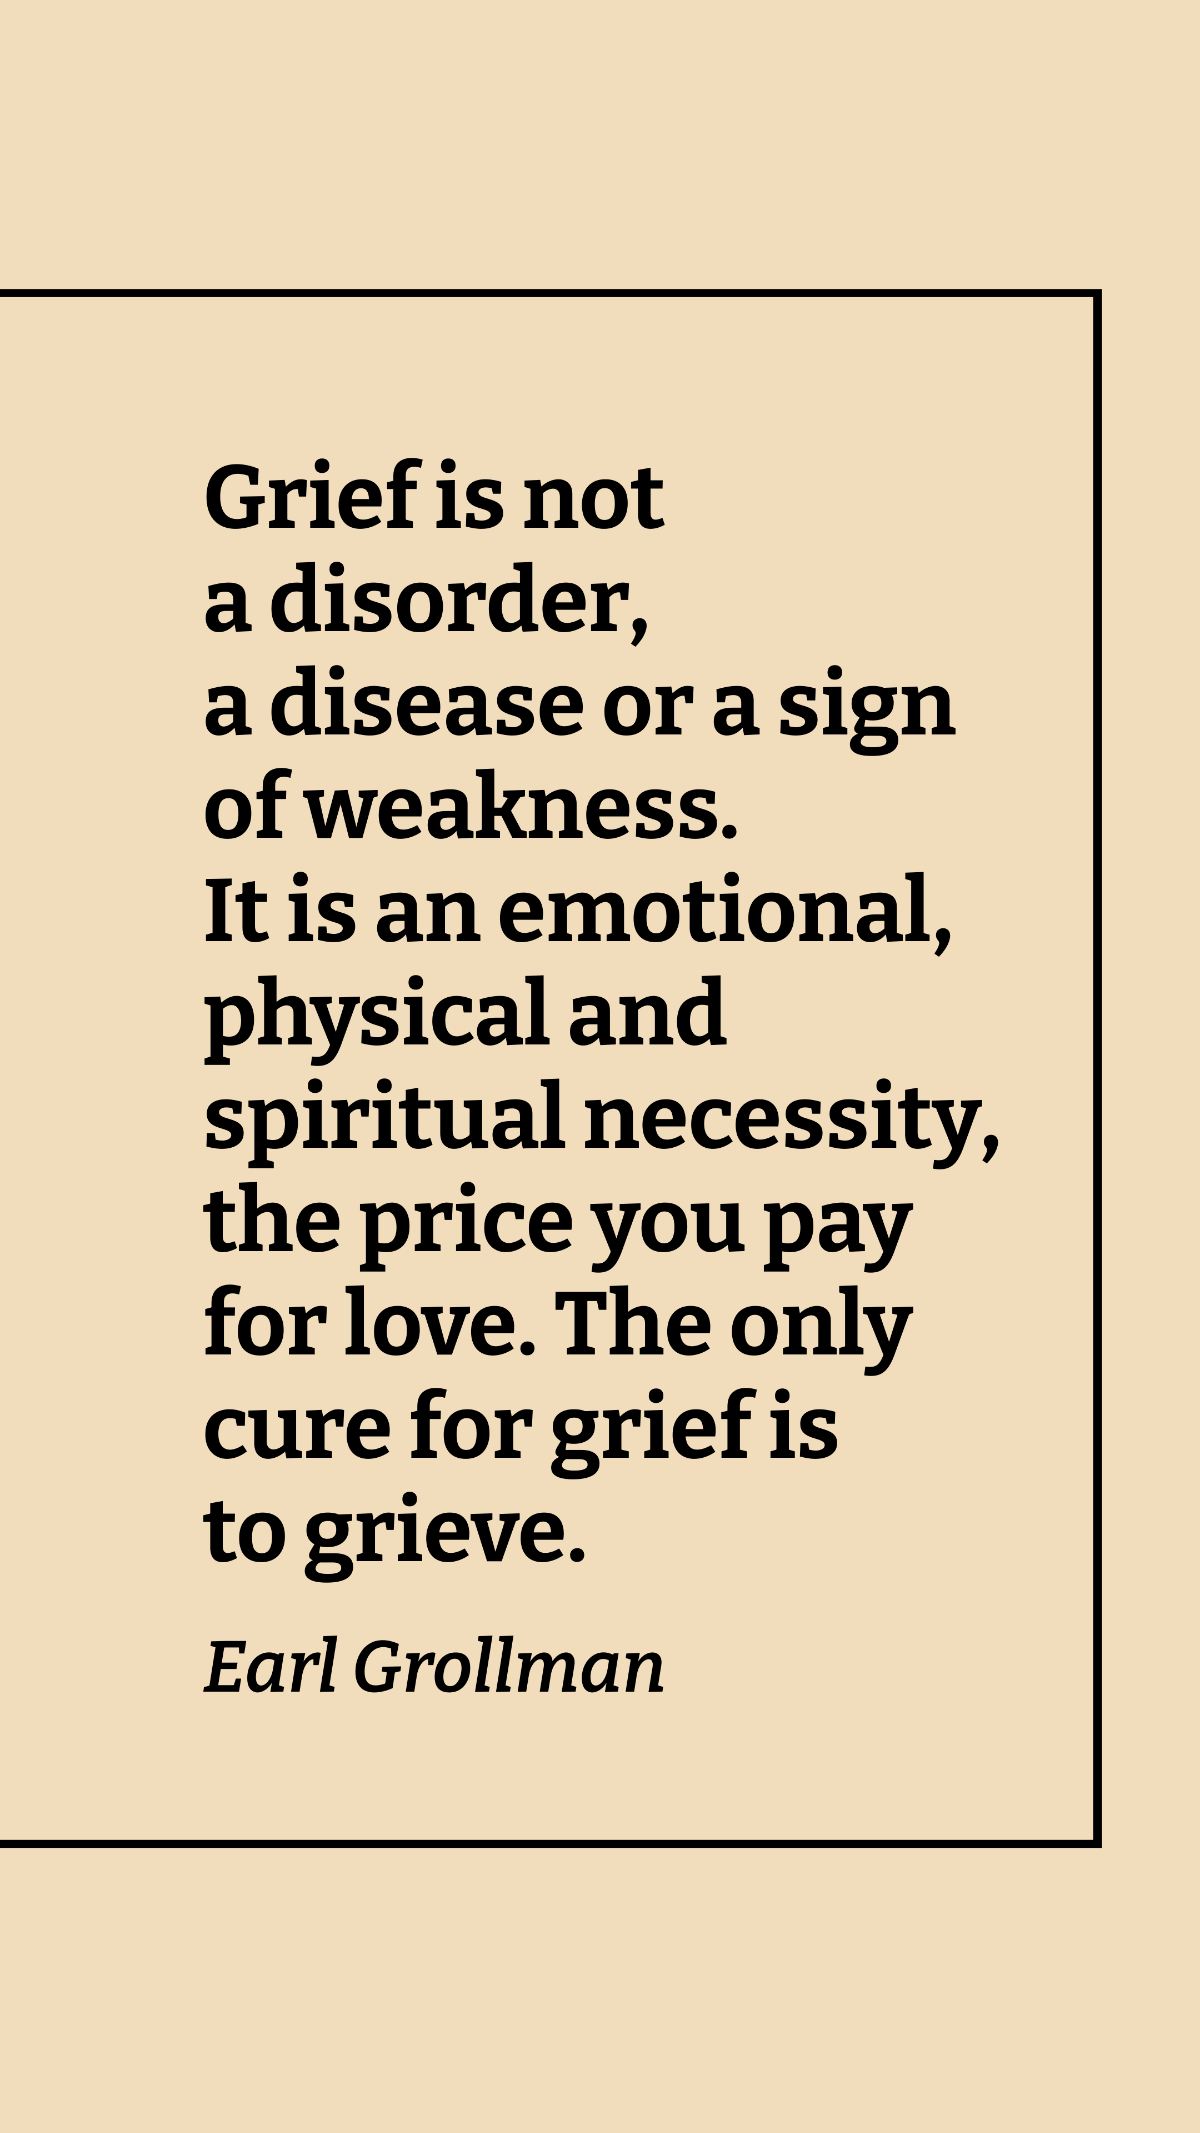 Earl Grollman - Grief is not a disorder, a disease or a sign of weakness. It is an emotional, physical and spiritual necessity, the price you pay for love. The only cure for grief is to grieve. Templa